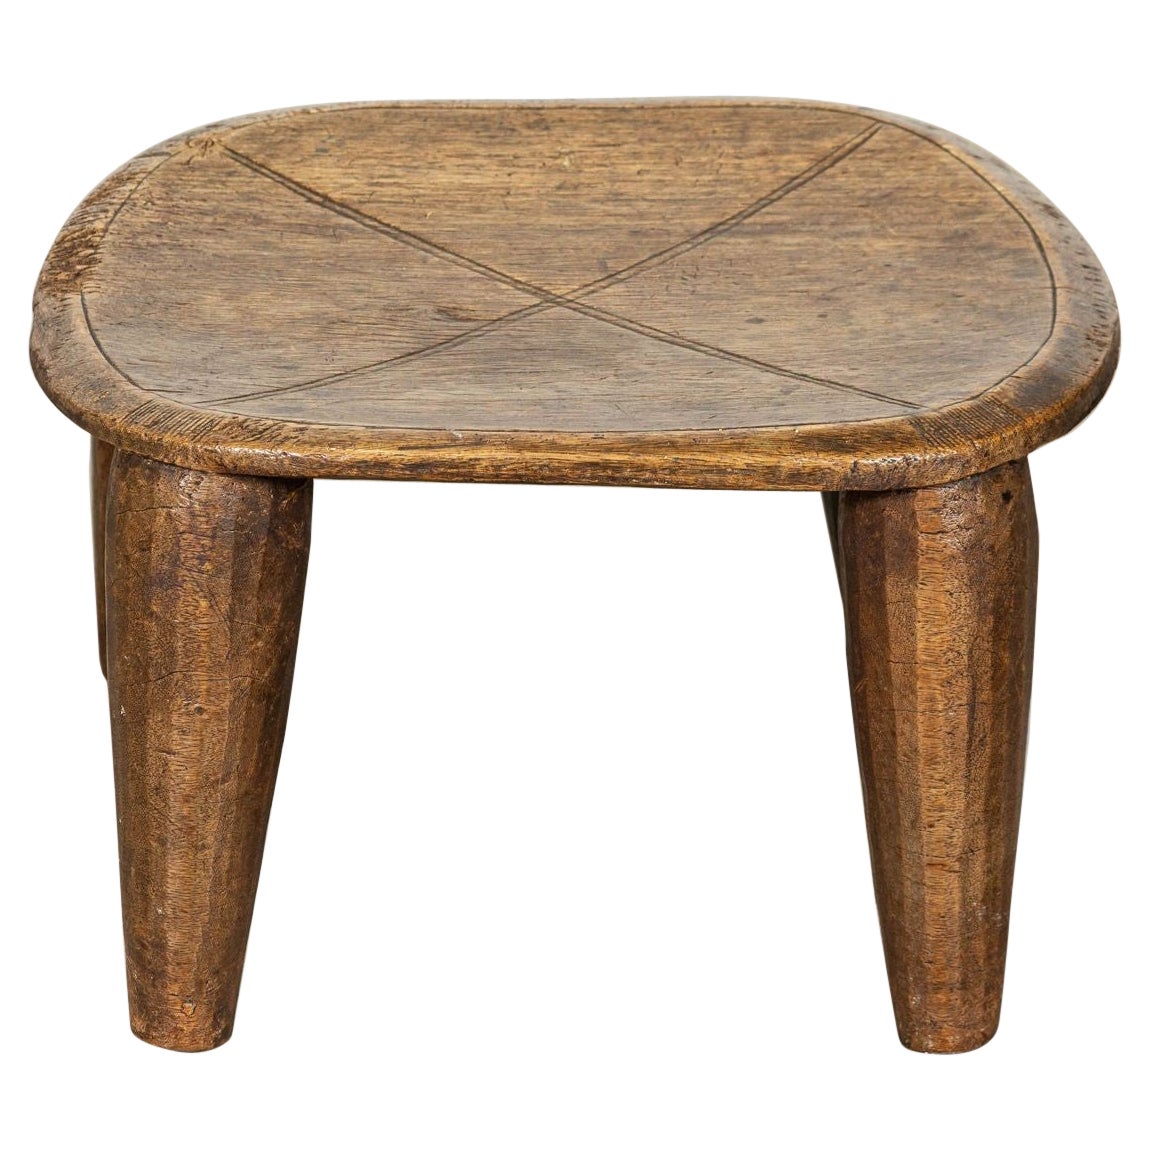 Tabouret / Table d'appoint africain Senufo